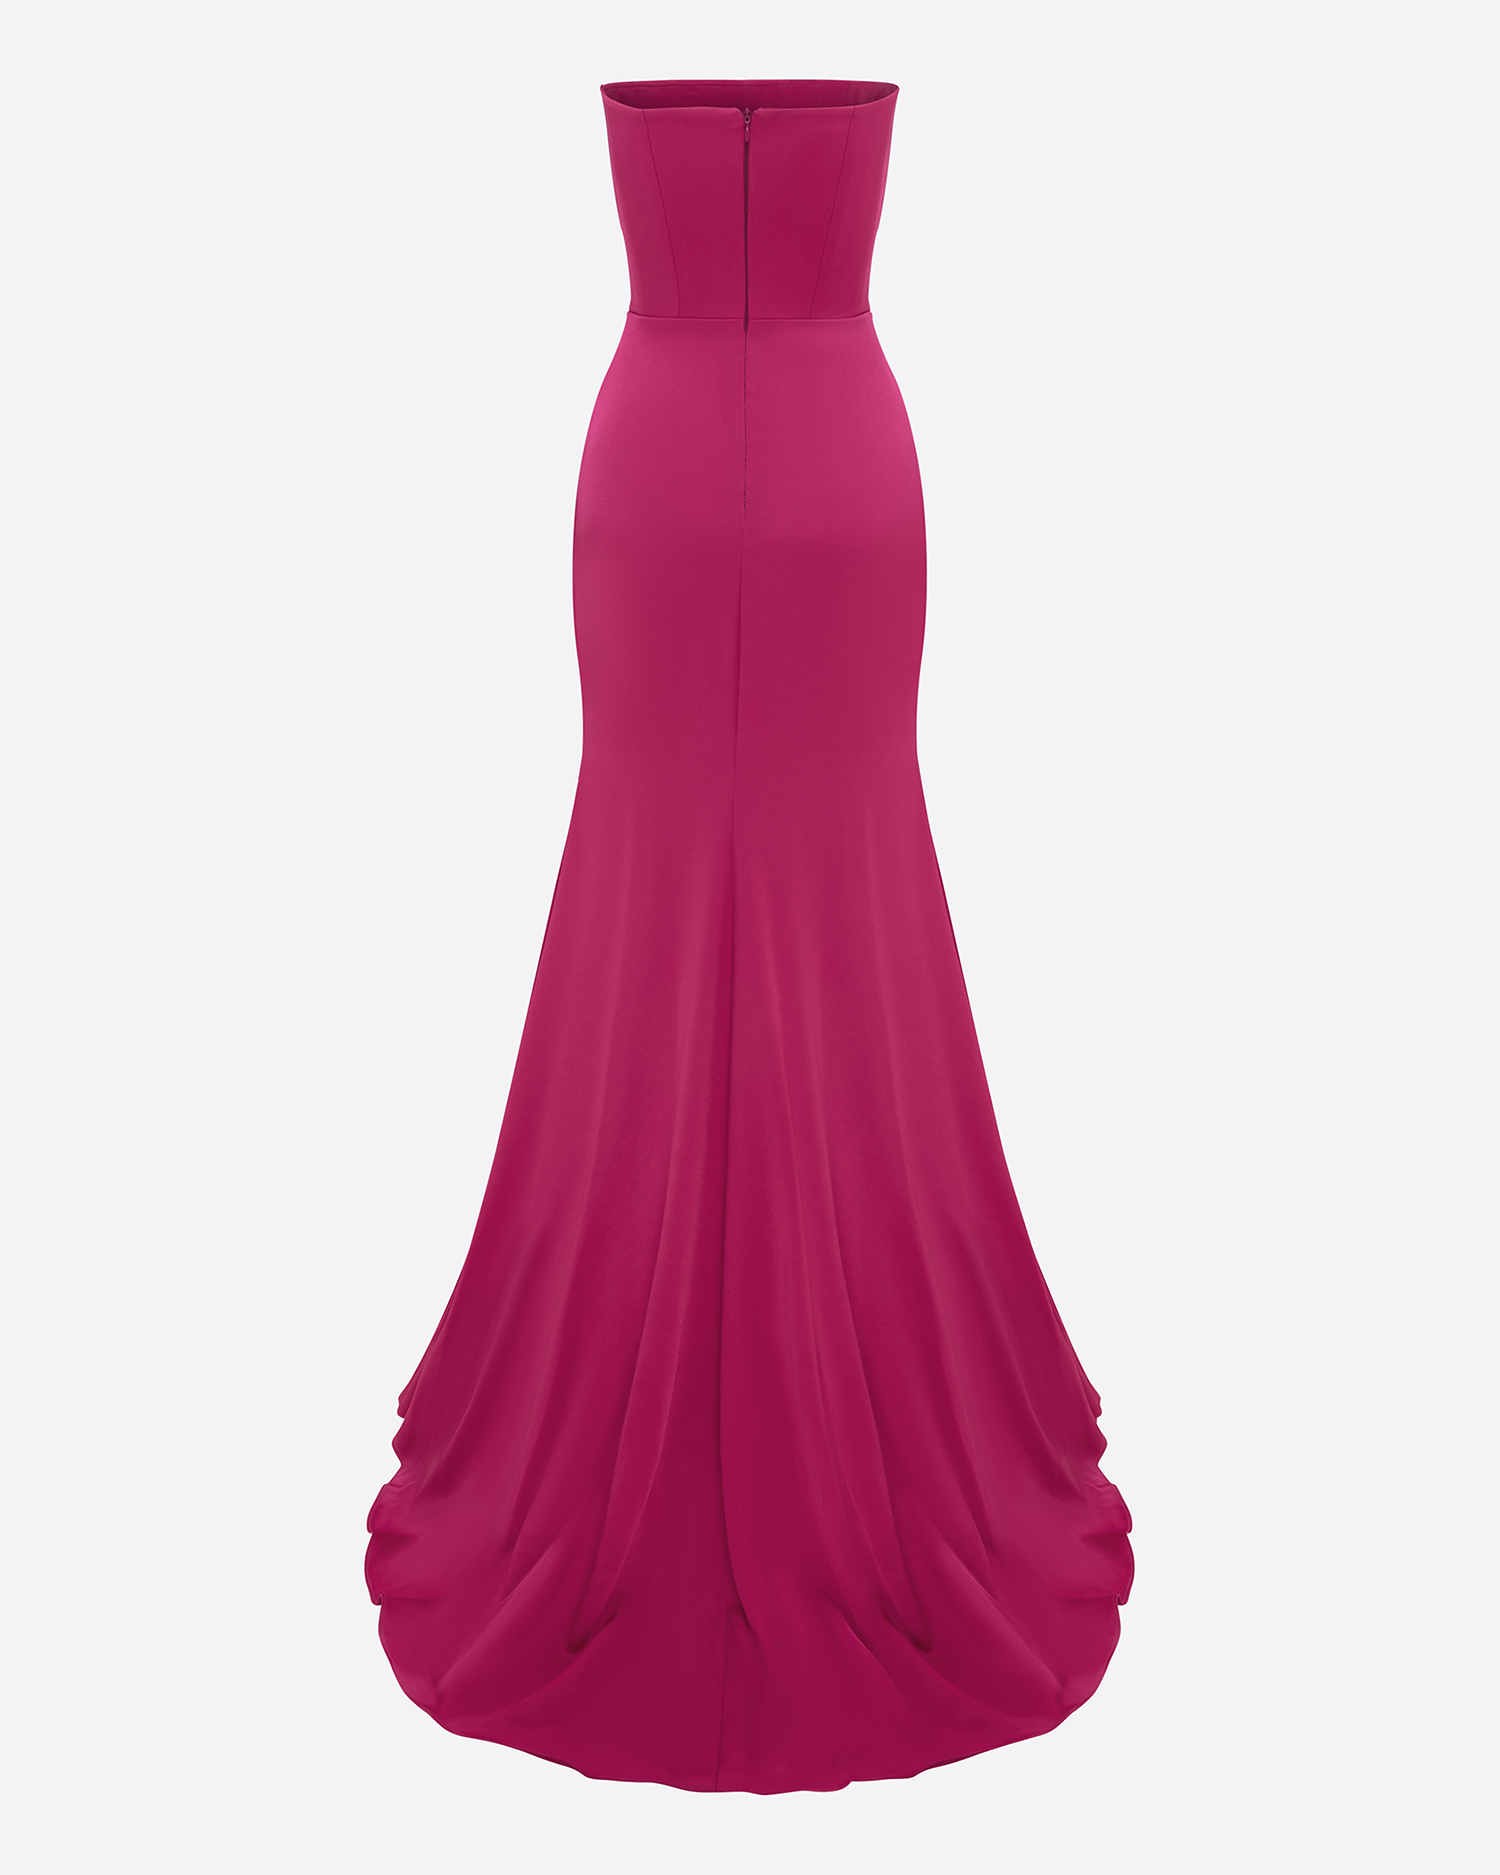 Strapless Gathered Drape Gown in Satin Crepe